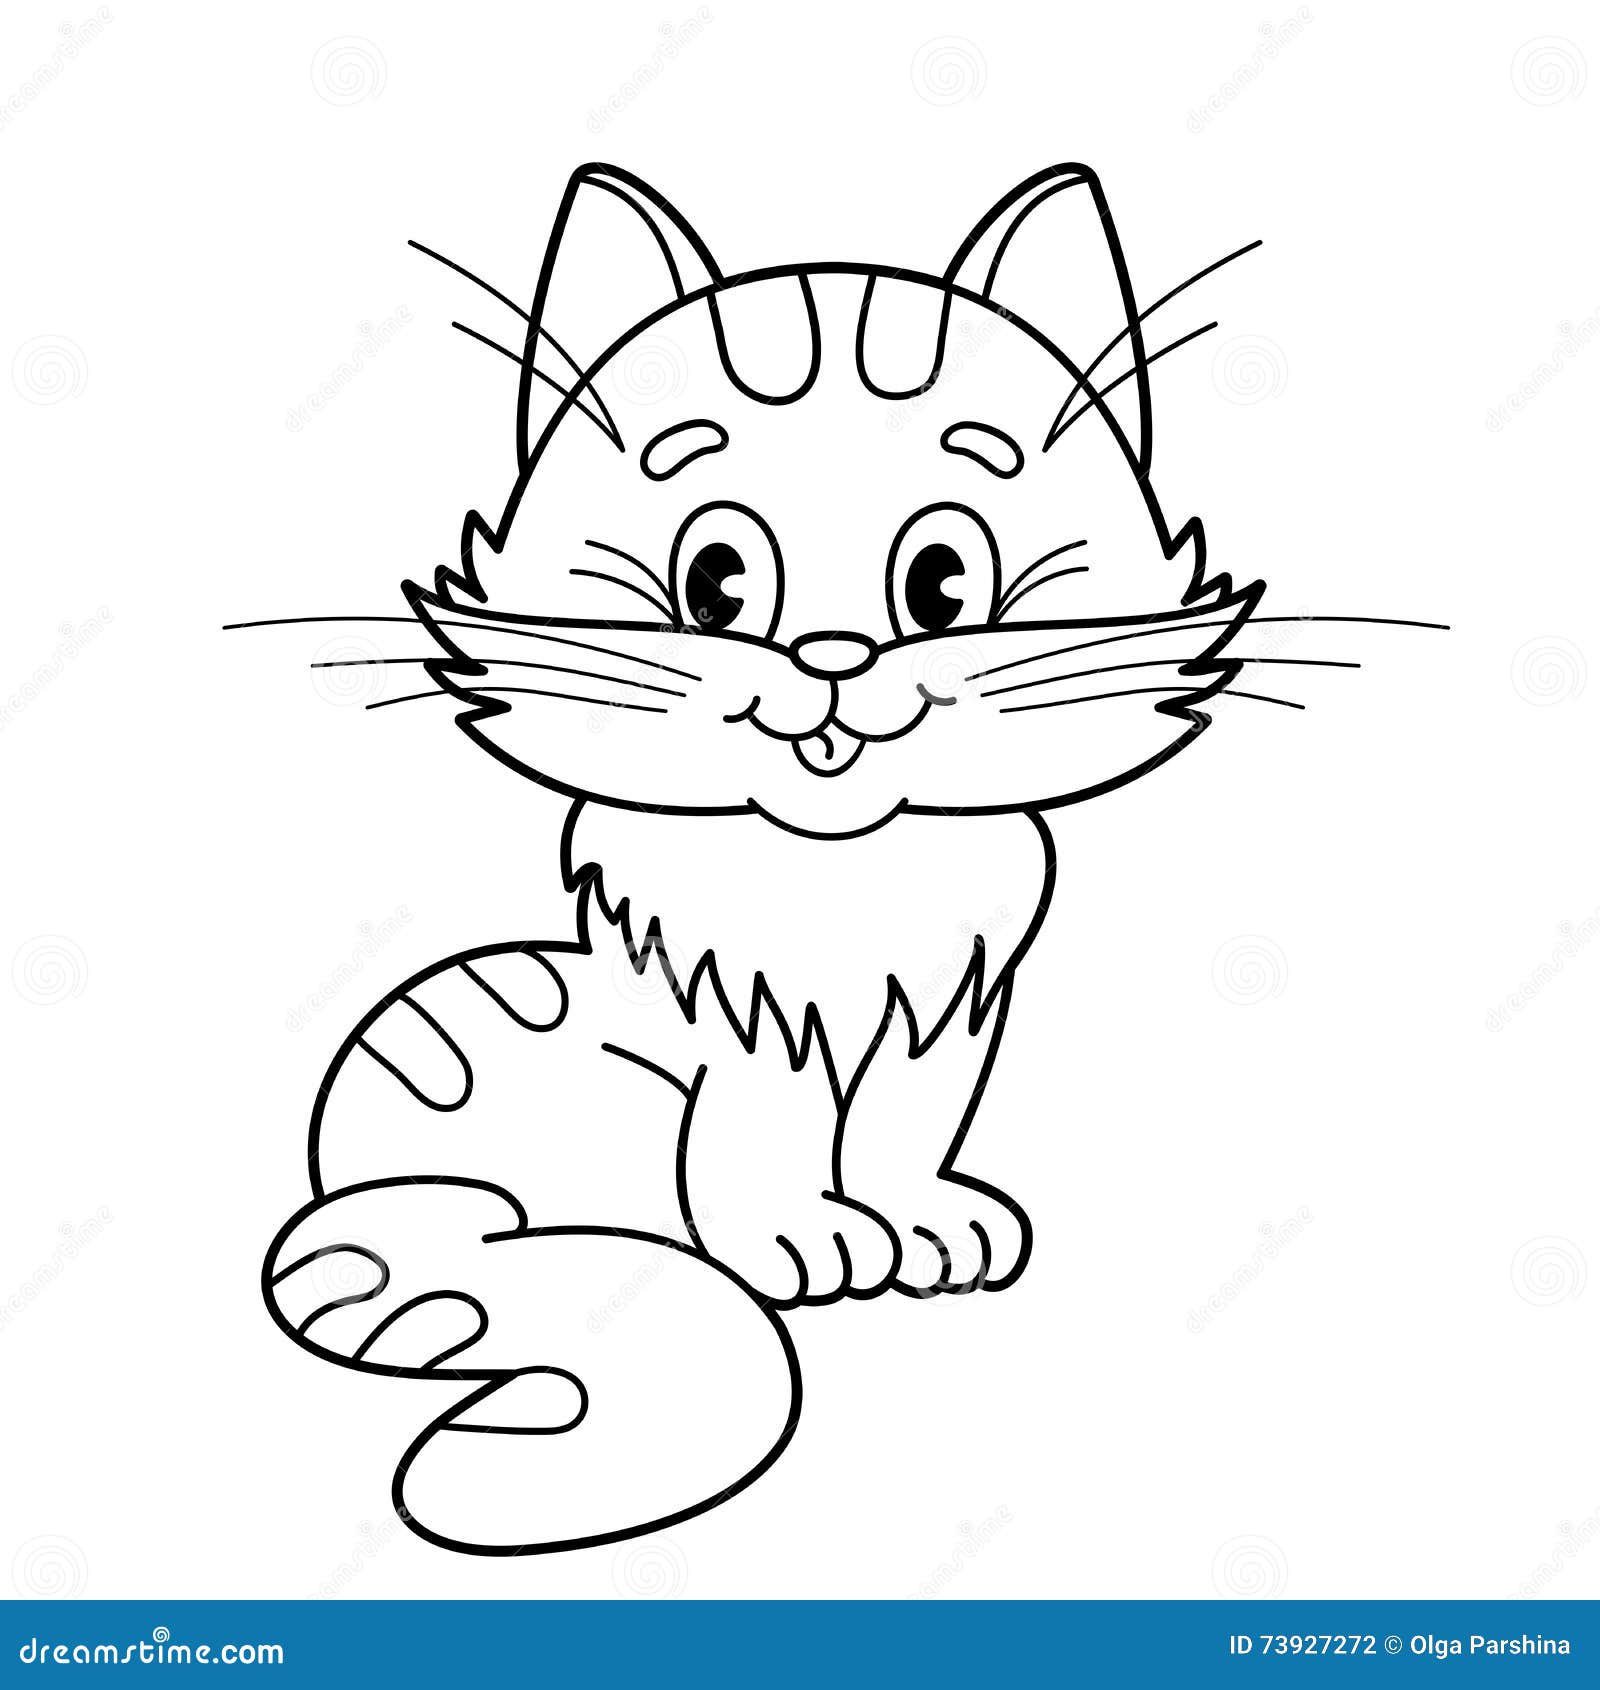 Coloring Page Outline of Cartoon Fluffy Cat. Coloring Book for ...